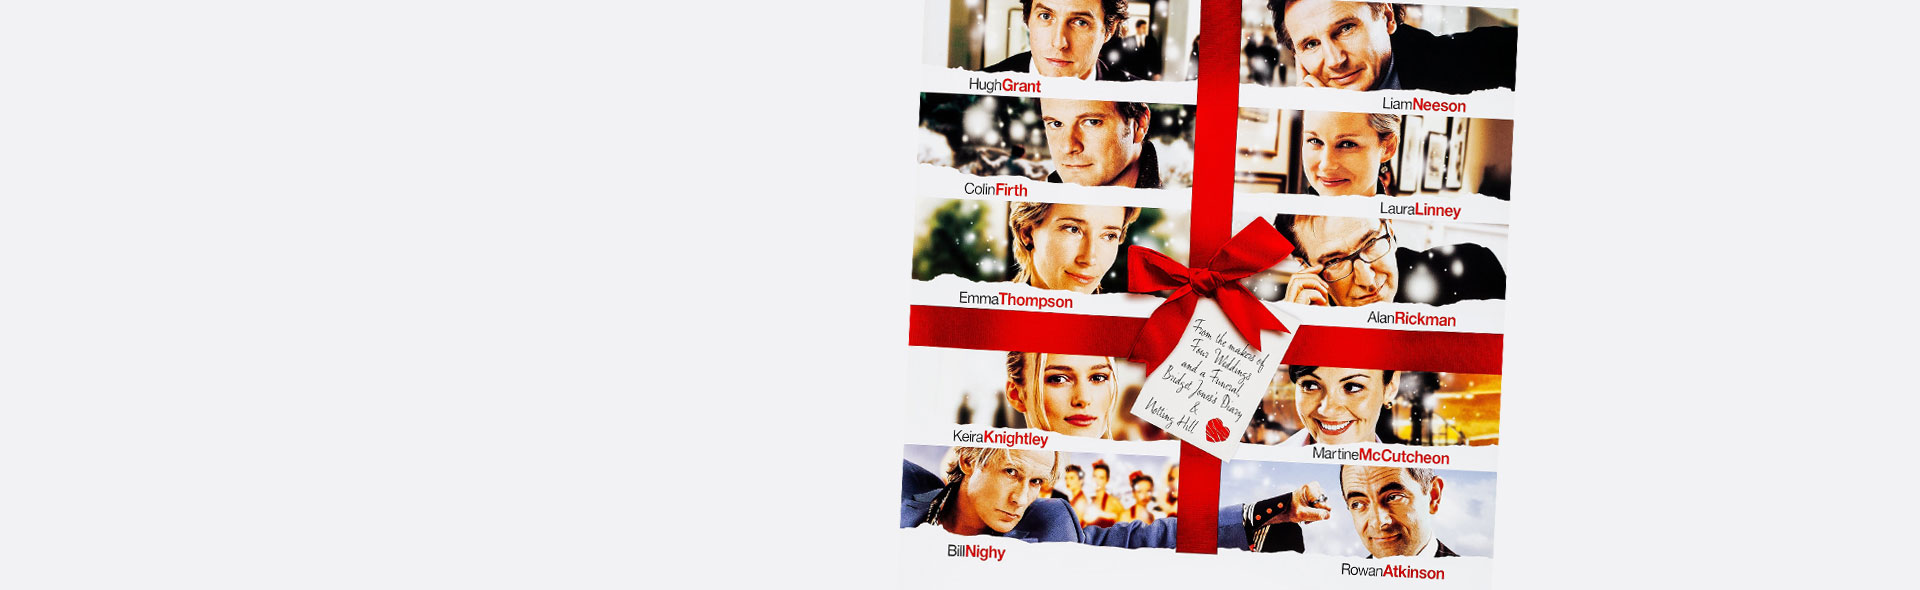 Love Actually_slide_poster